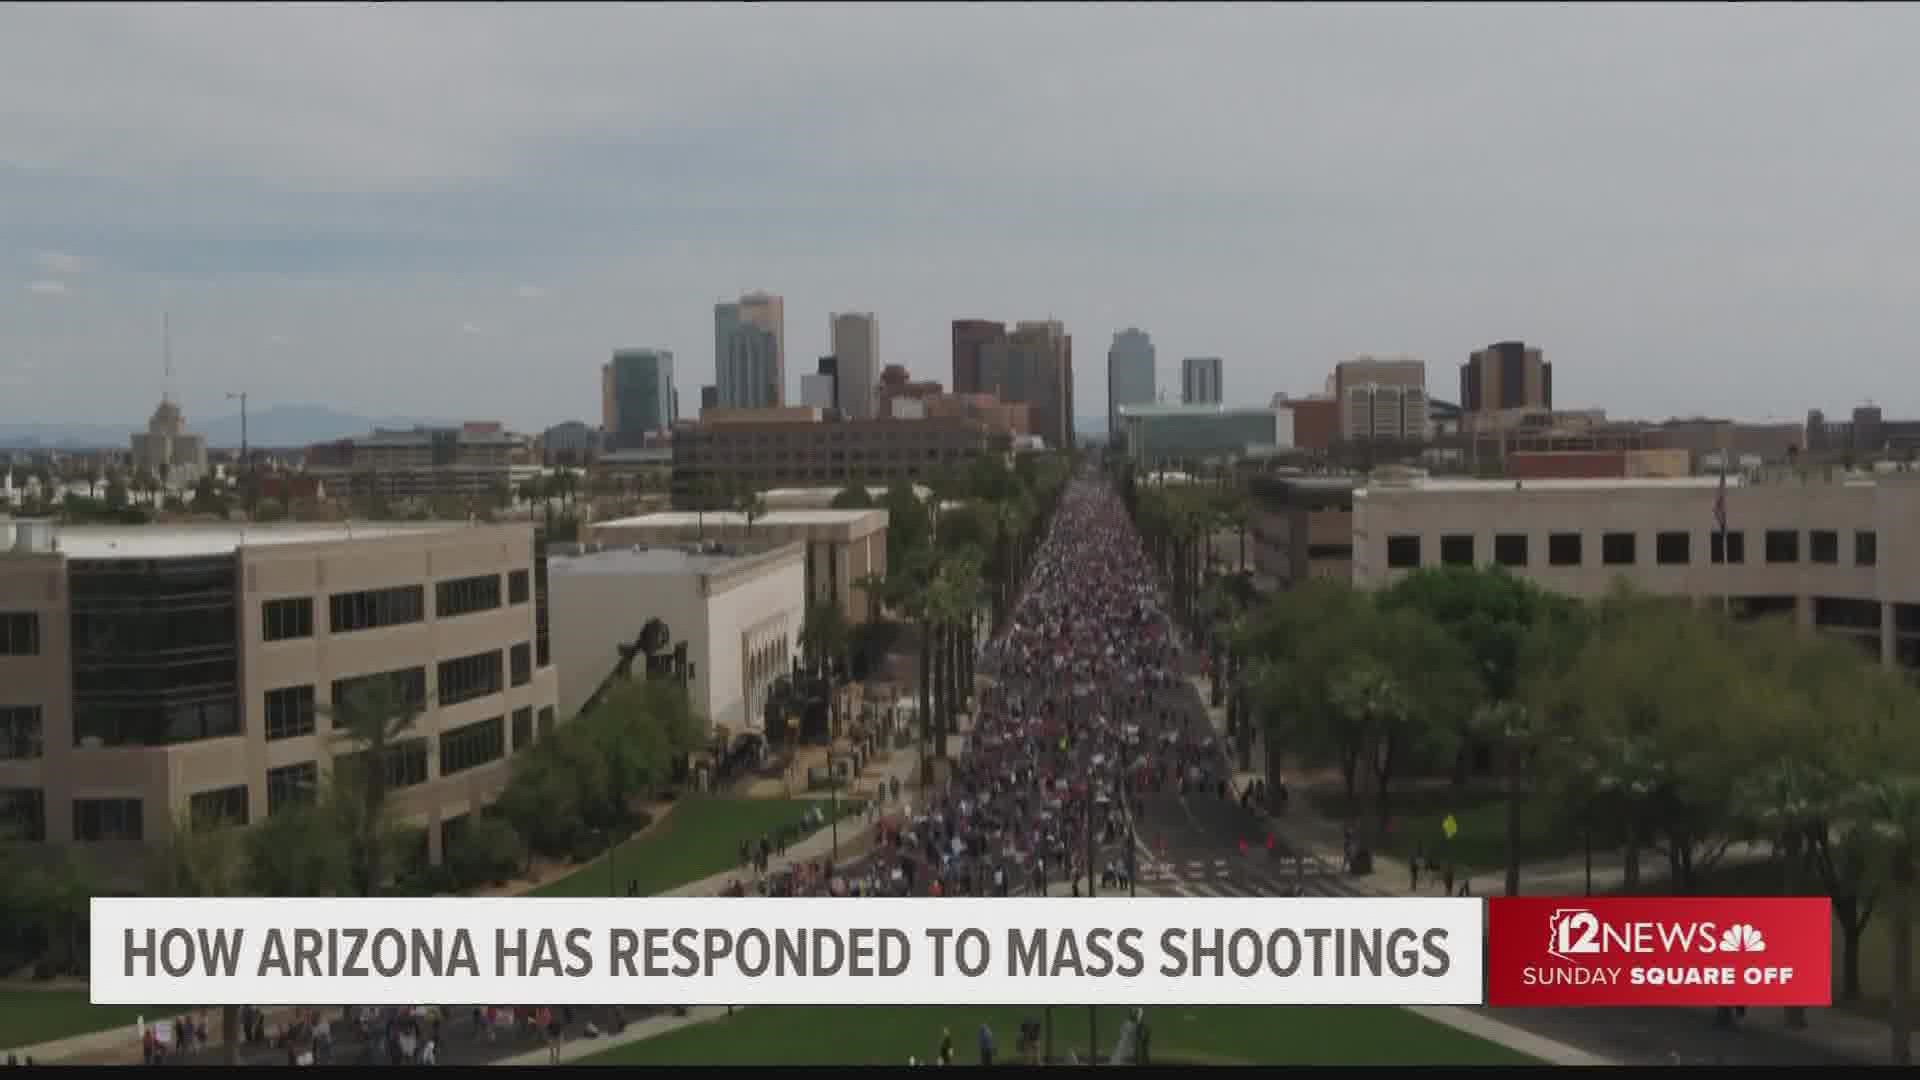 Do you remember what happened after the massive 2018 March For Our Lives against gun violence at the Arizona State Capitol?